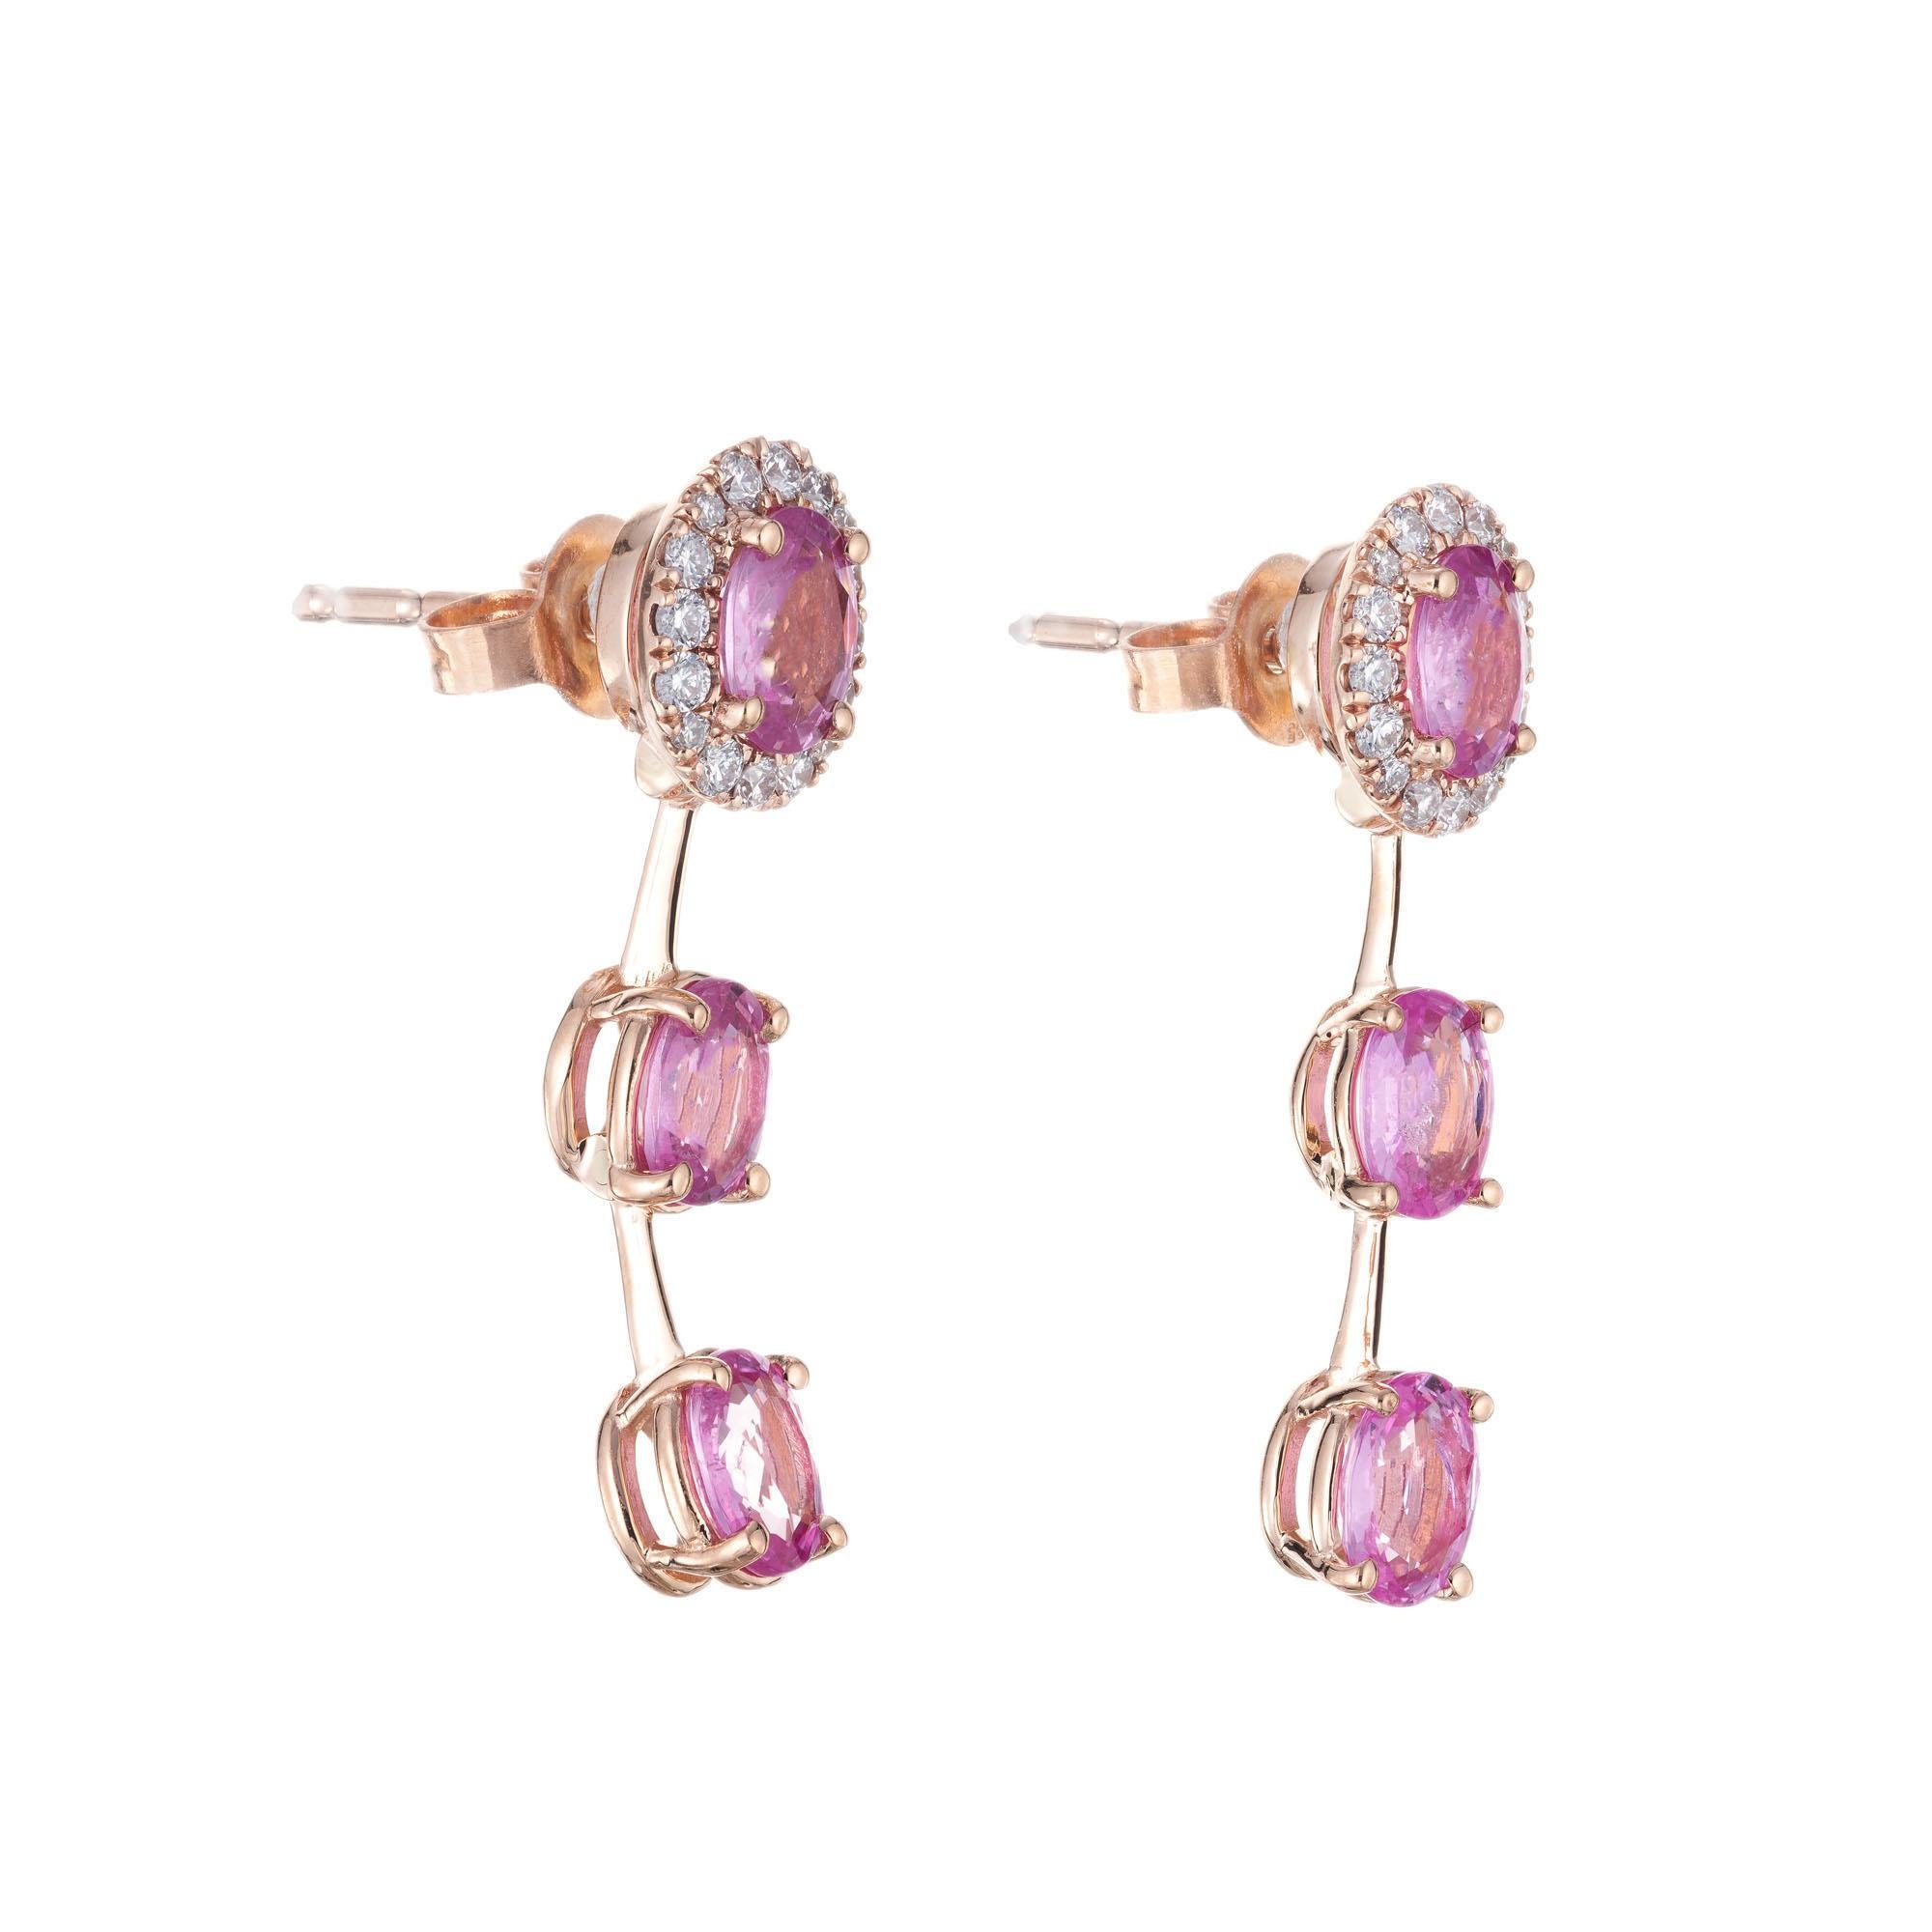 Sapphire and diamond dangle drop earrings. 6 pink oval sapphires with diamond halos around two top sapphires in 14k rose gold. Crafted in the Peter Suchy workshop. GIA certified. one stone randomly tested.

6 oval pink sapphires, SI approx. 2.70cts